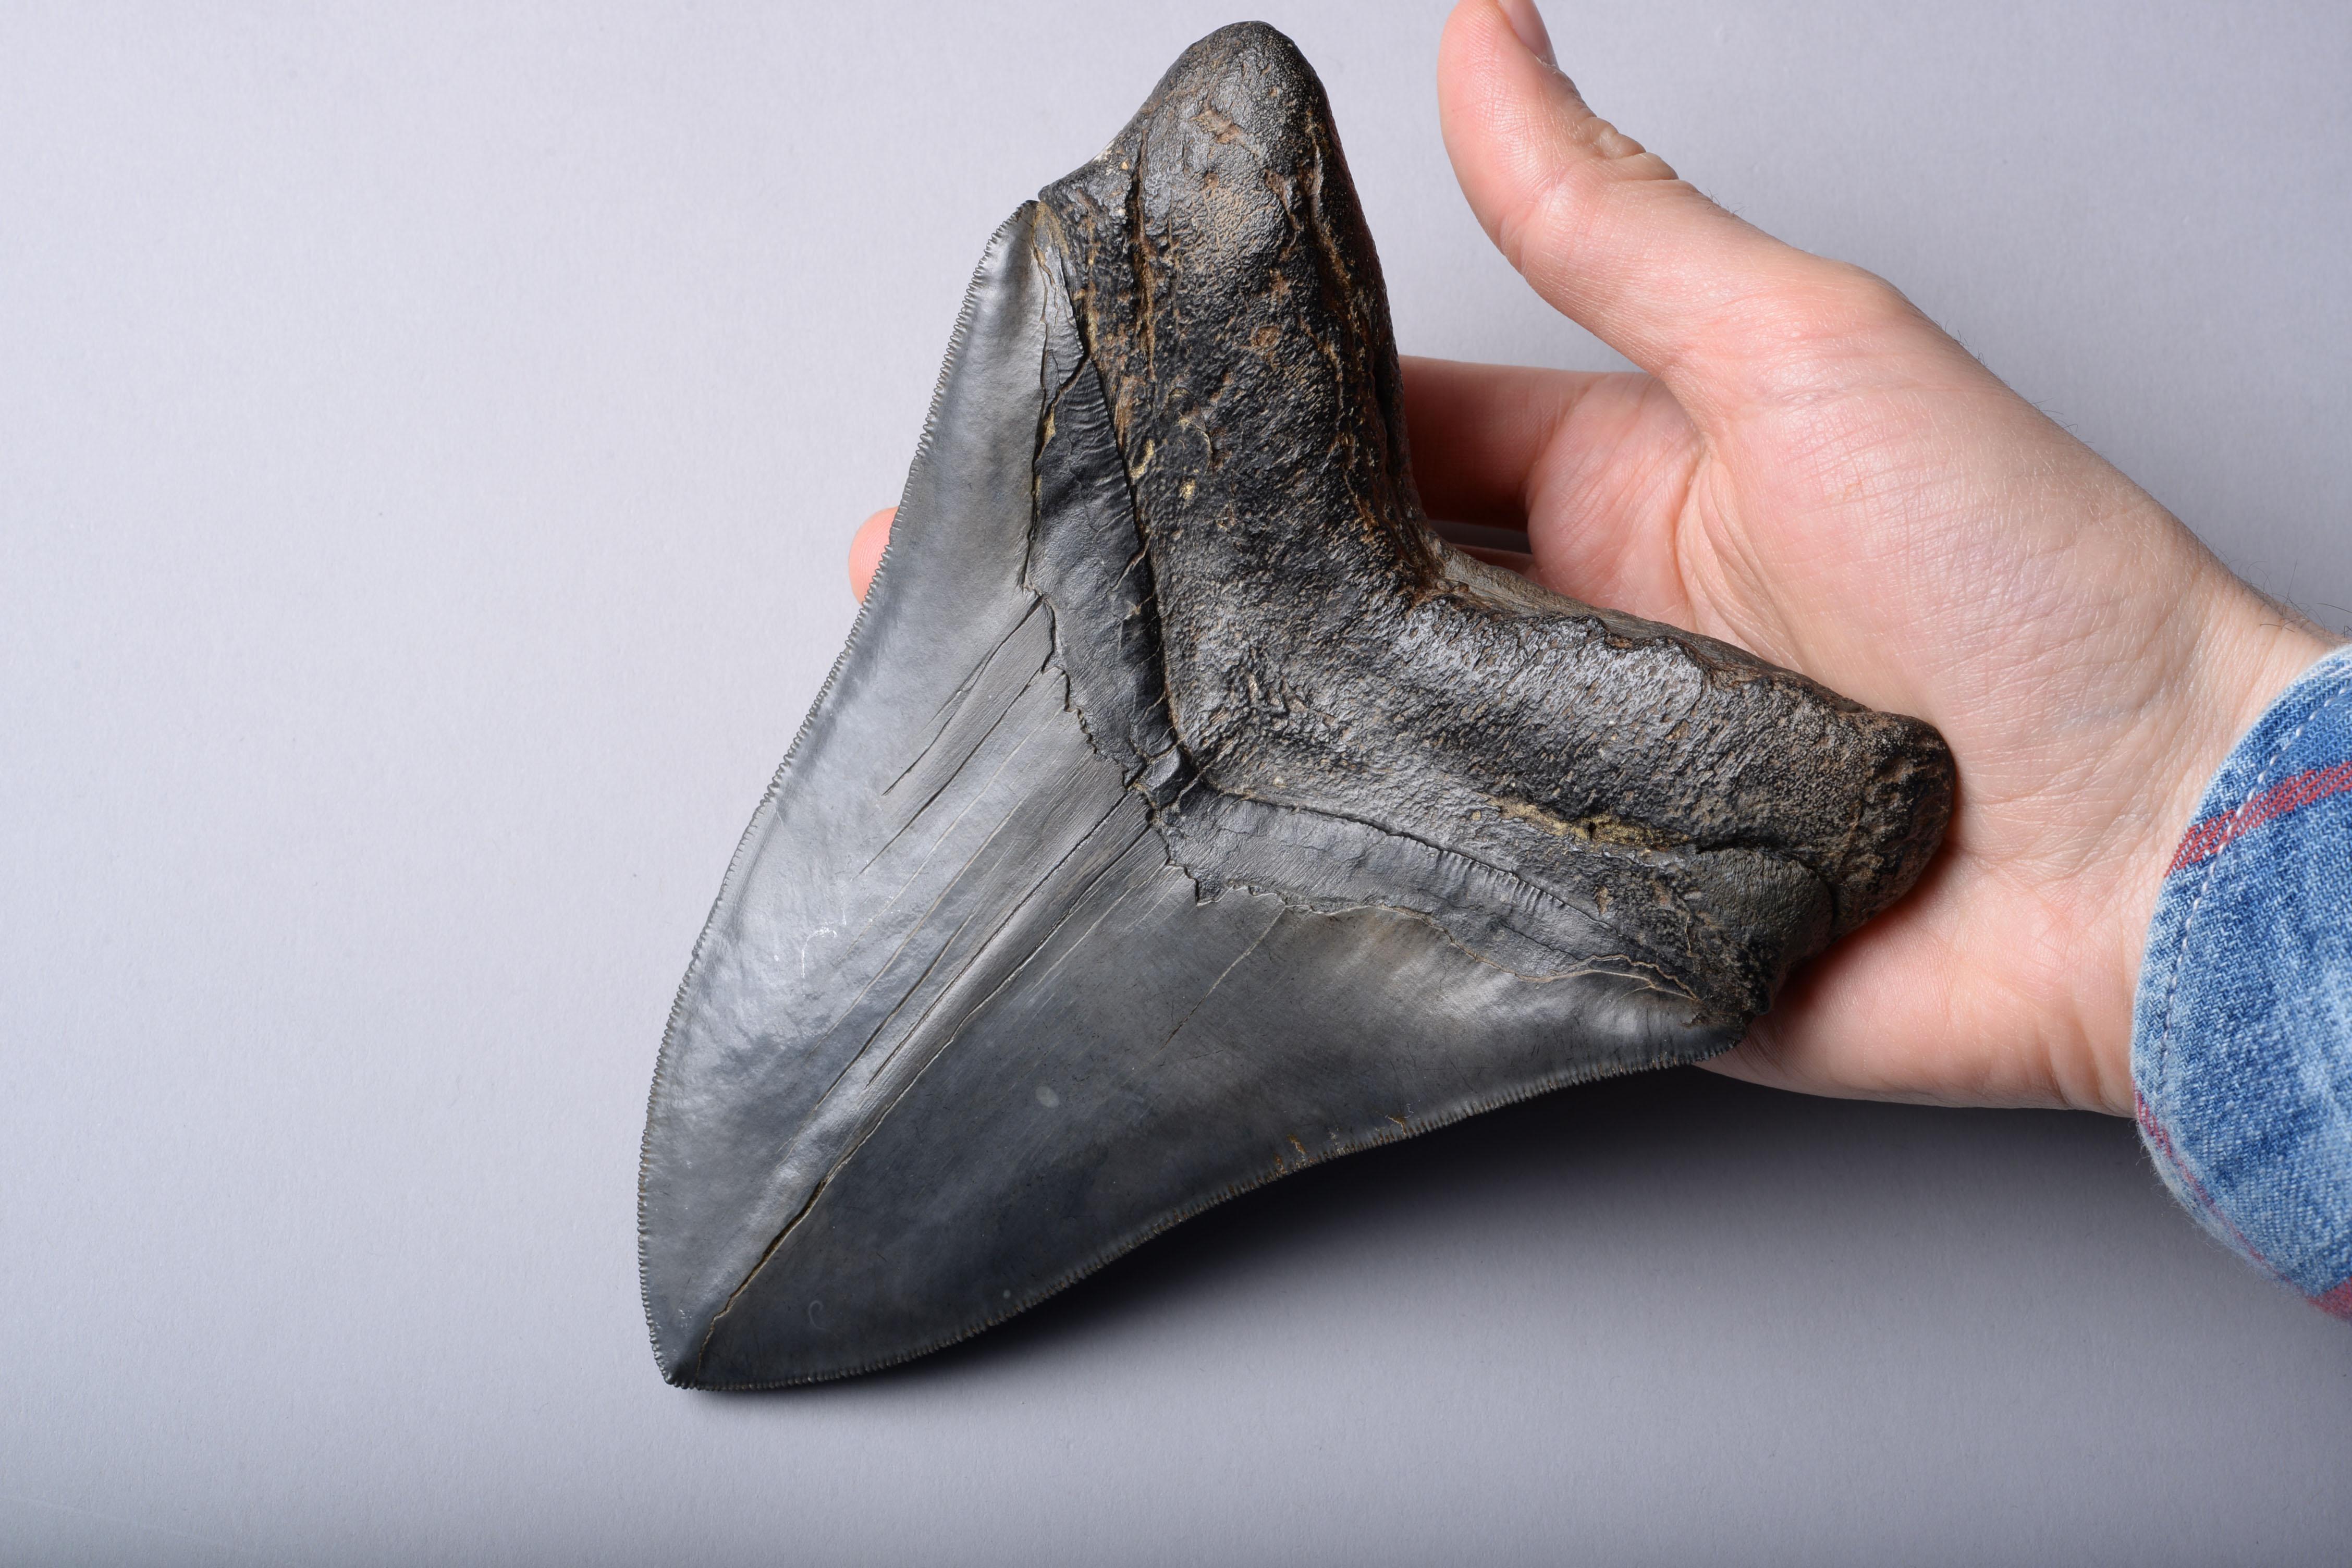 A huge, 6 1/2 inch Megalodon (Carcharocles megalodon) shark tooth, dating to 25 – 2 million years before the present day. 

It's hard to comprehend that this enormous serrated tooth once belonged to a living creature. Yet this beautiful fossil